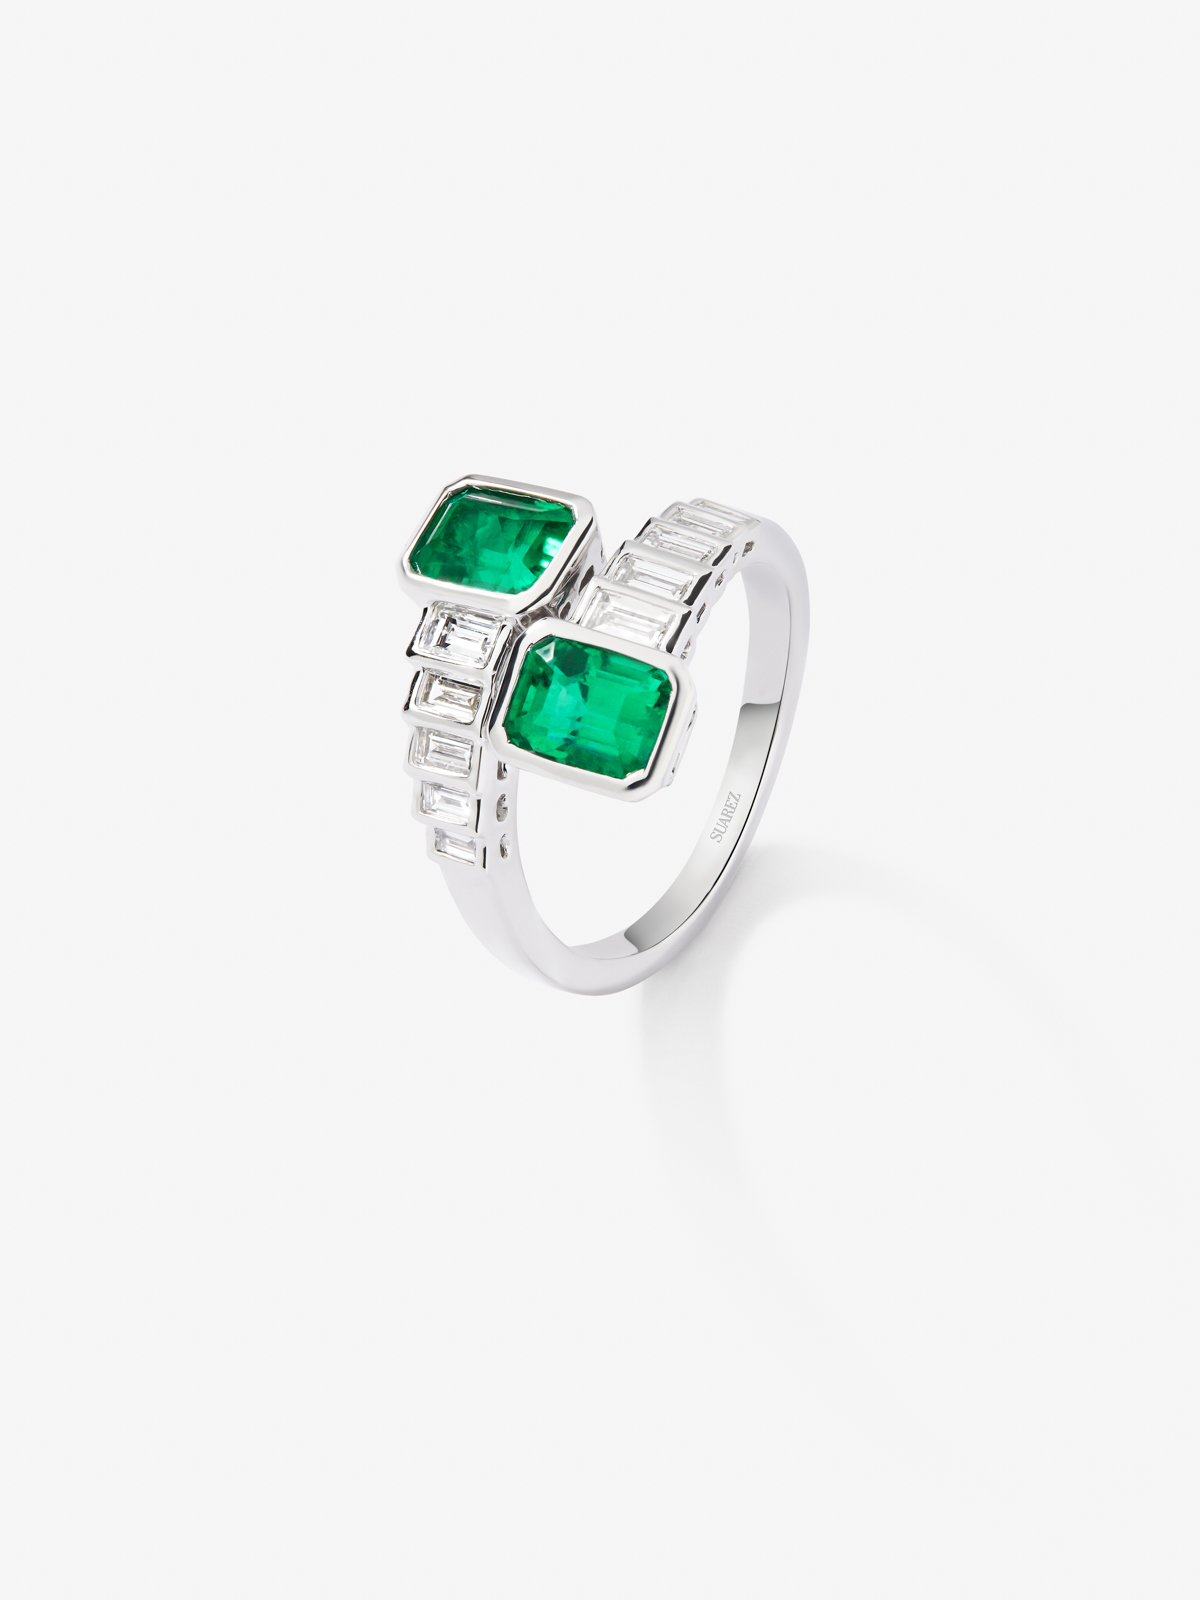 You and I 18k White Gold Ring with Green Emeralds in Octagonal Size 1.81 cts and white diamonds in 0.72 cts bag